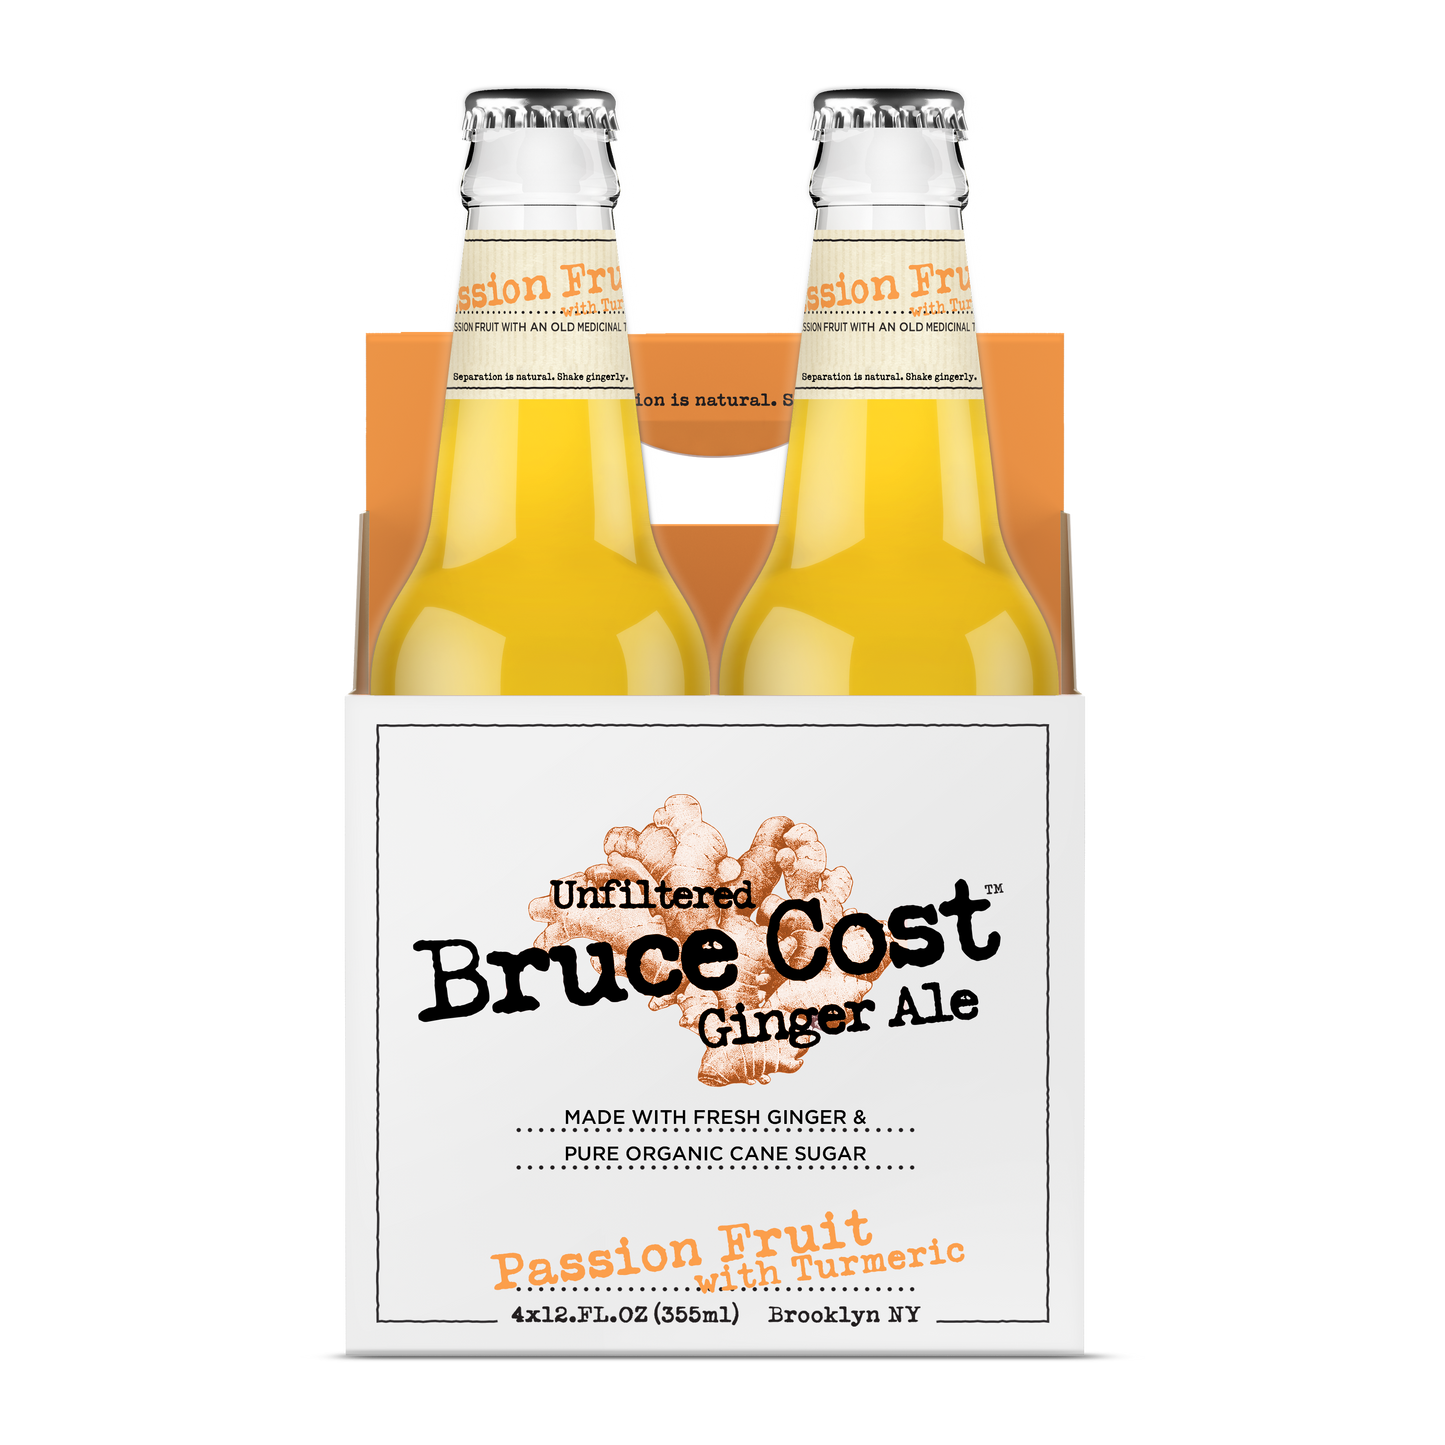 Bruce Cost Ginger Ale - Passion Fruit with Turmeric